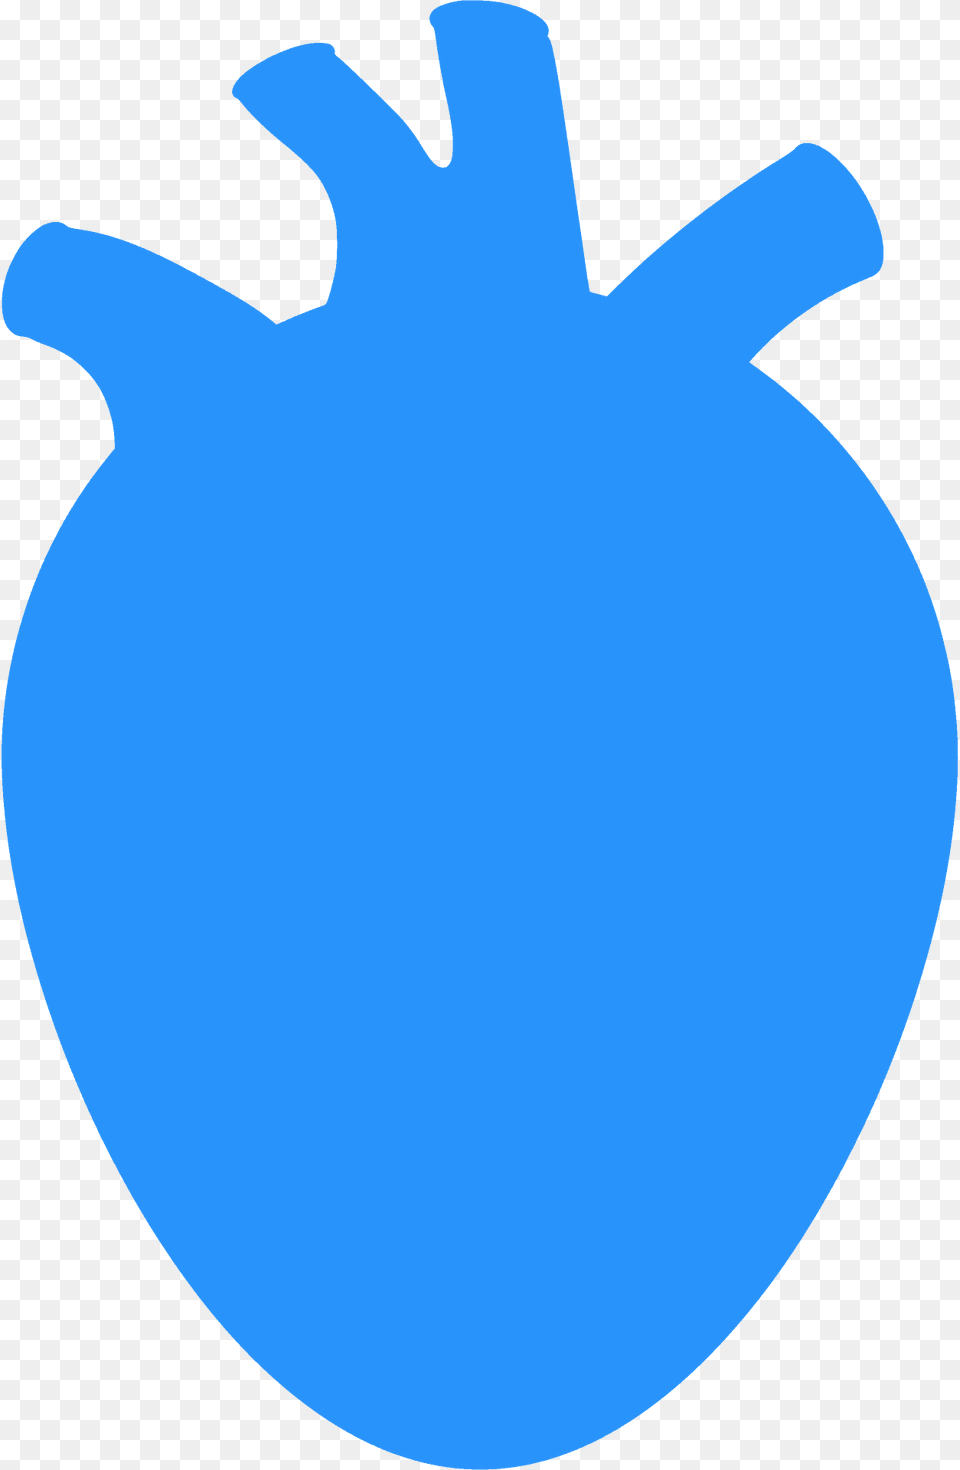 Human Heart Silhouette, Pottery, Jar, Food, Fruit Png